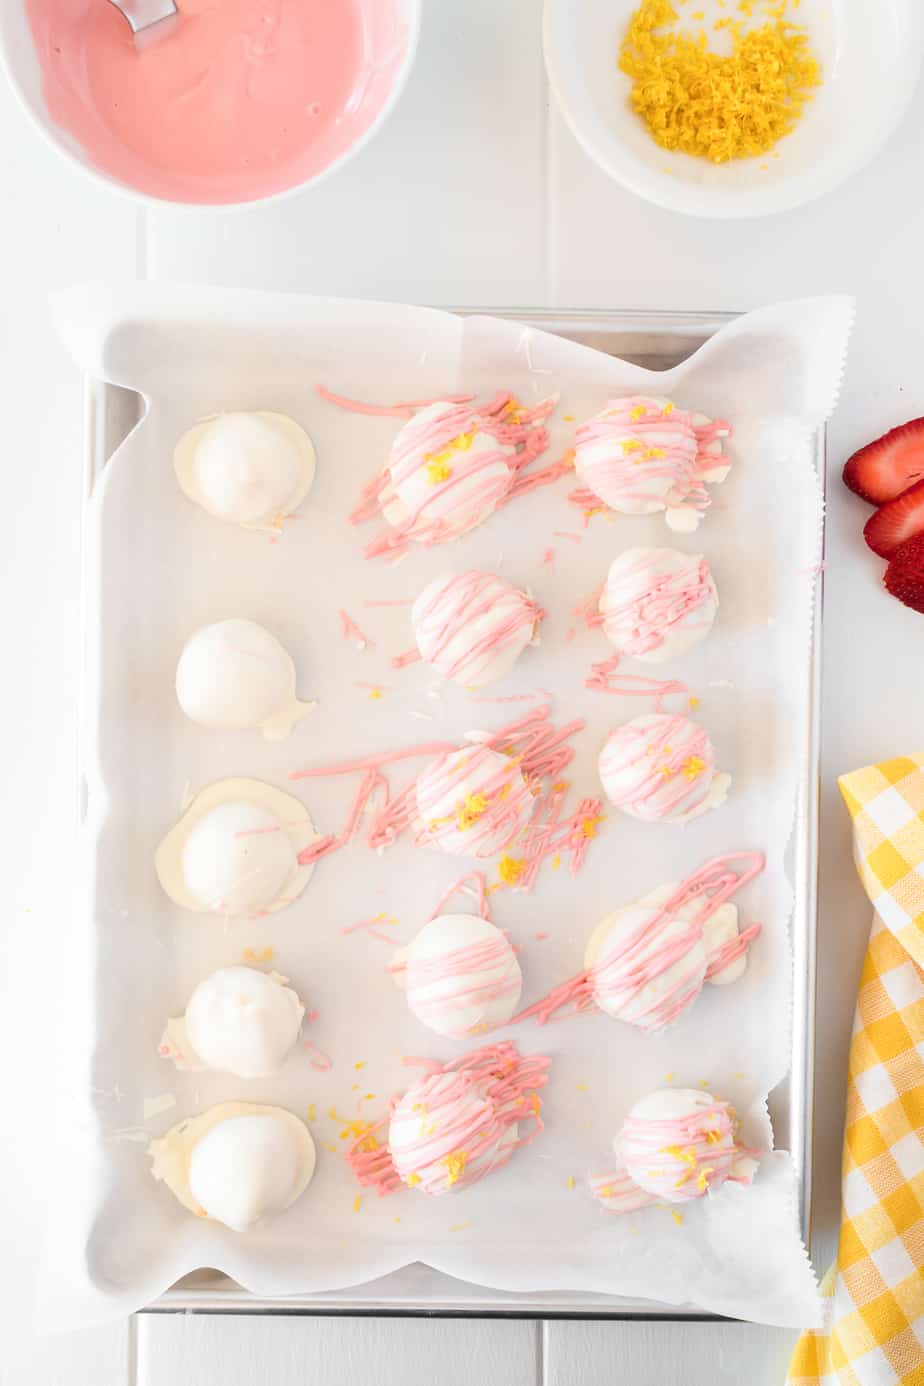 strawberry lemonade truffles dipped in white chocolate on a pan being drizzled with melted pink chocolate and lemon zest from nearby bowls.